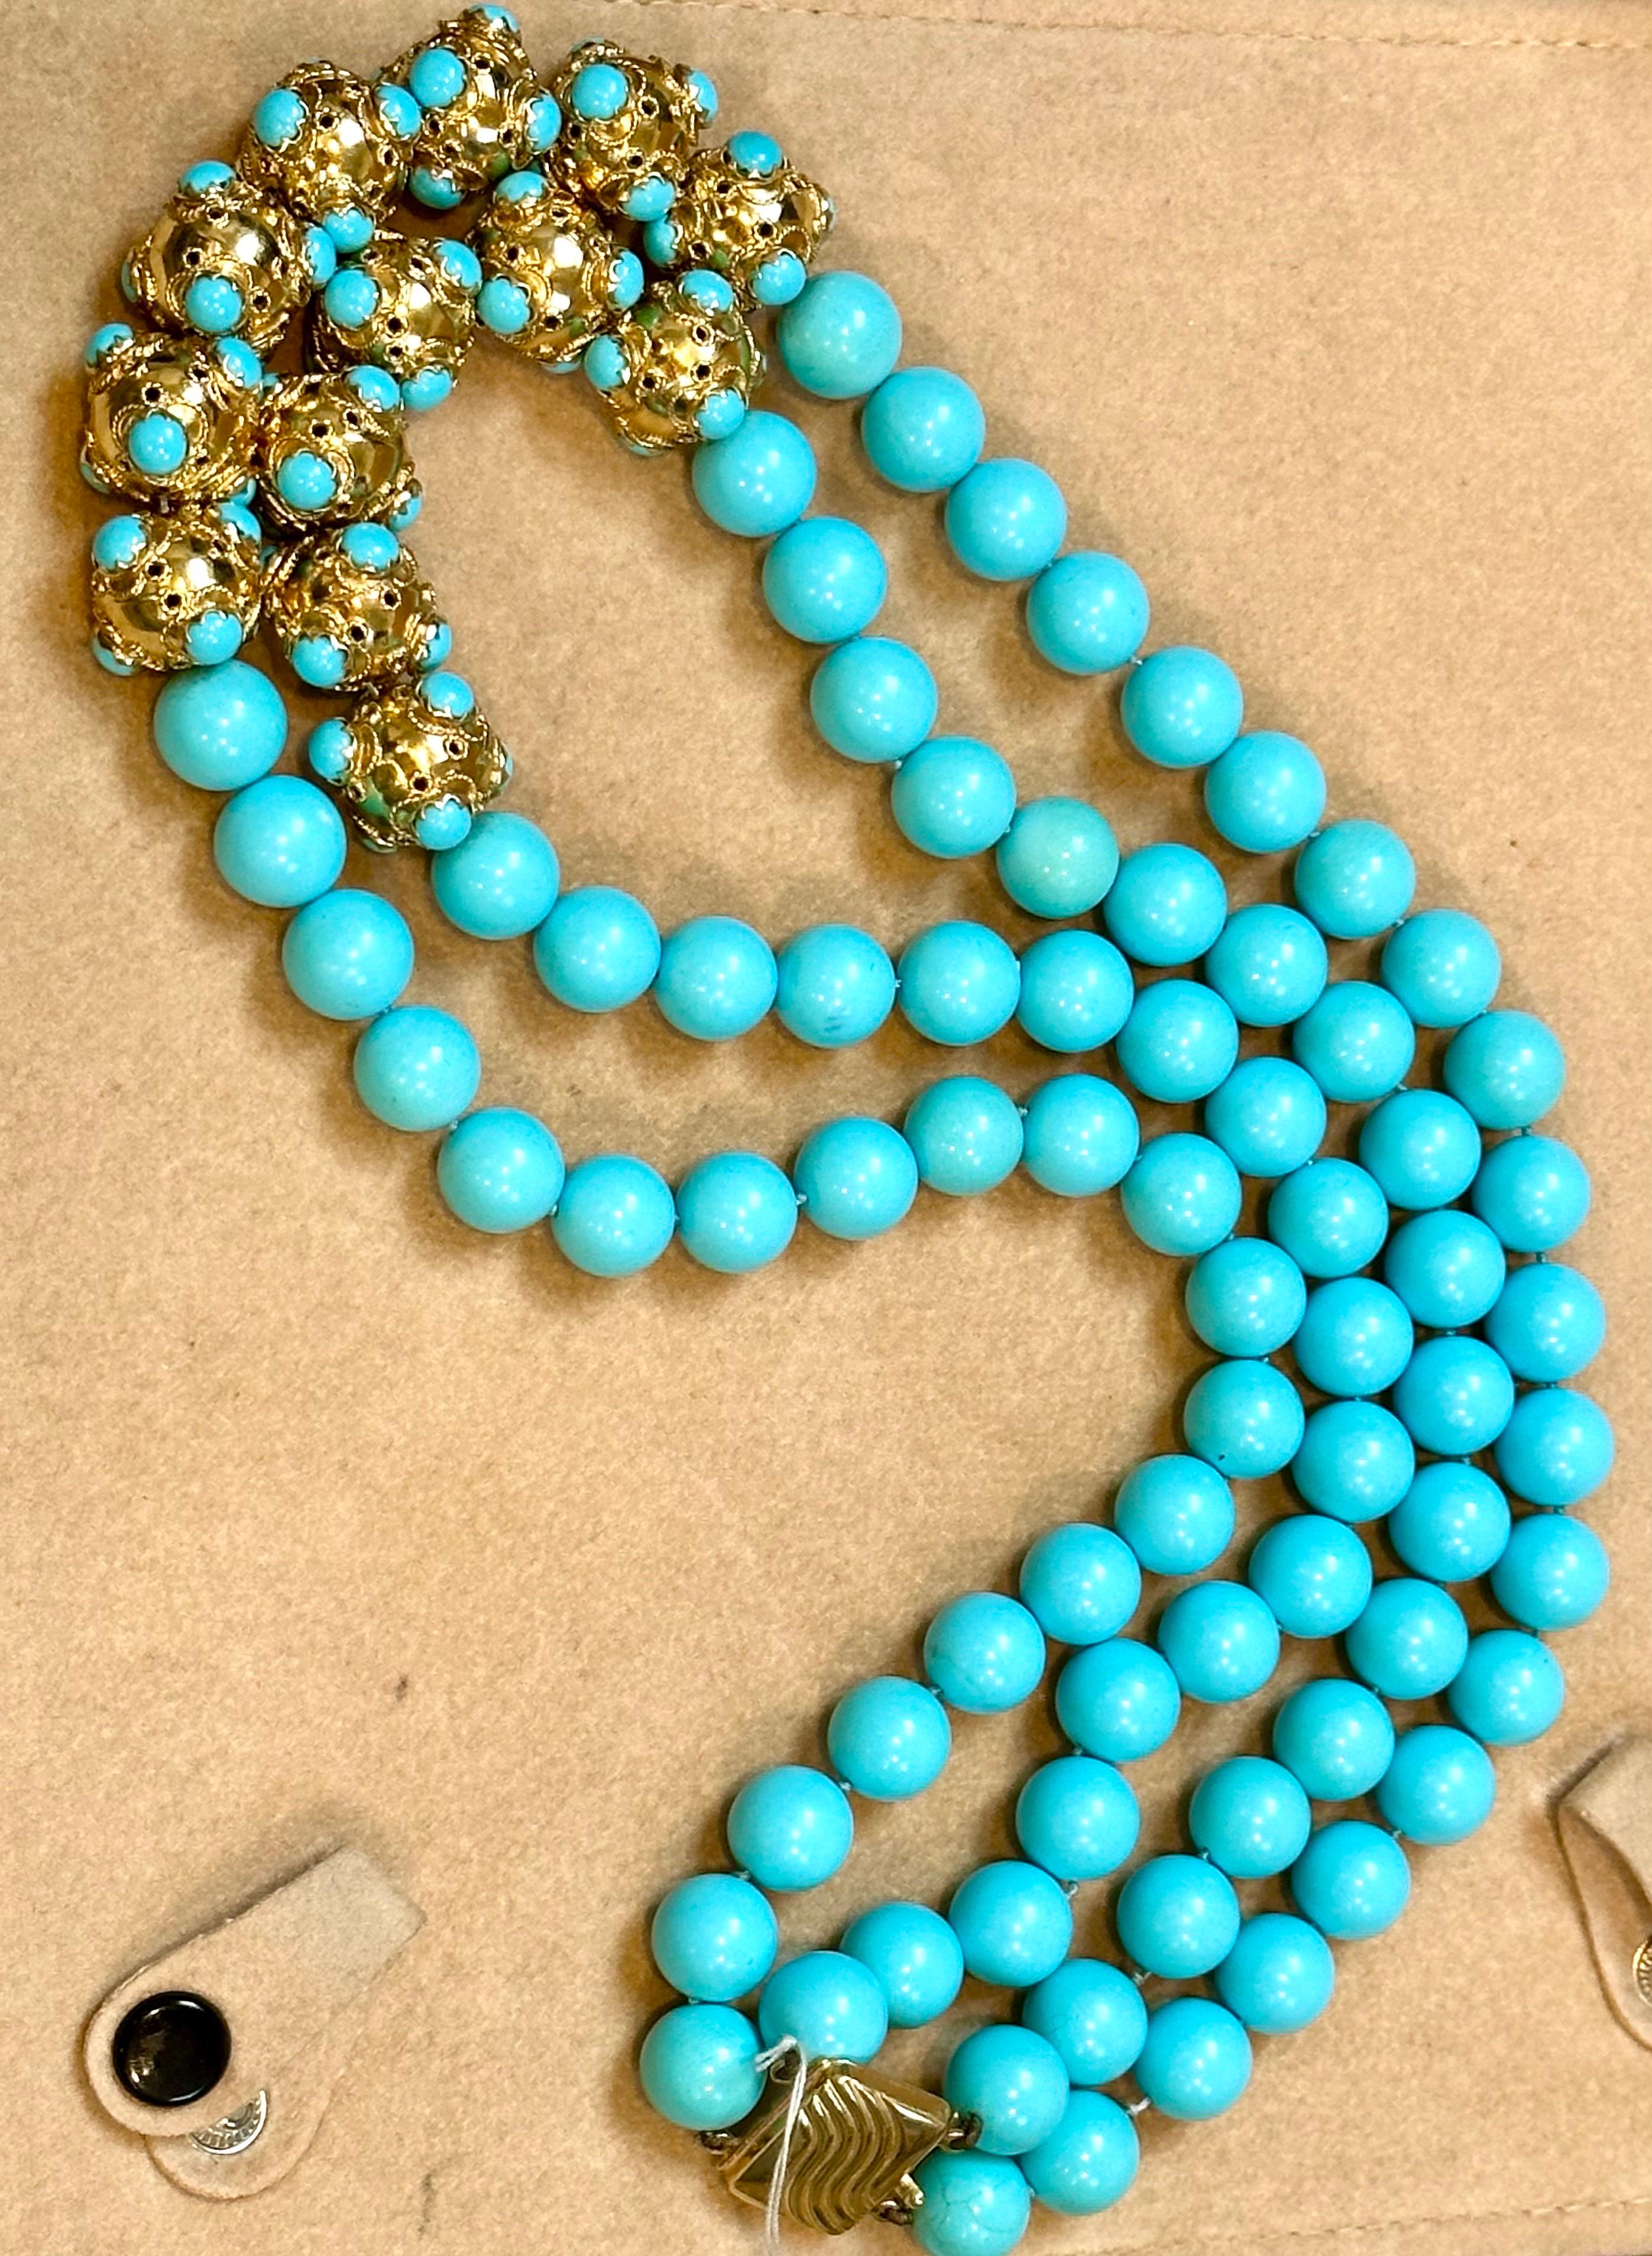 Vintage 600 Ct Natural Sleeping Beauty Turquoise Necklace, Two Strand 18 Kt Gold 3